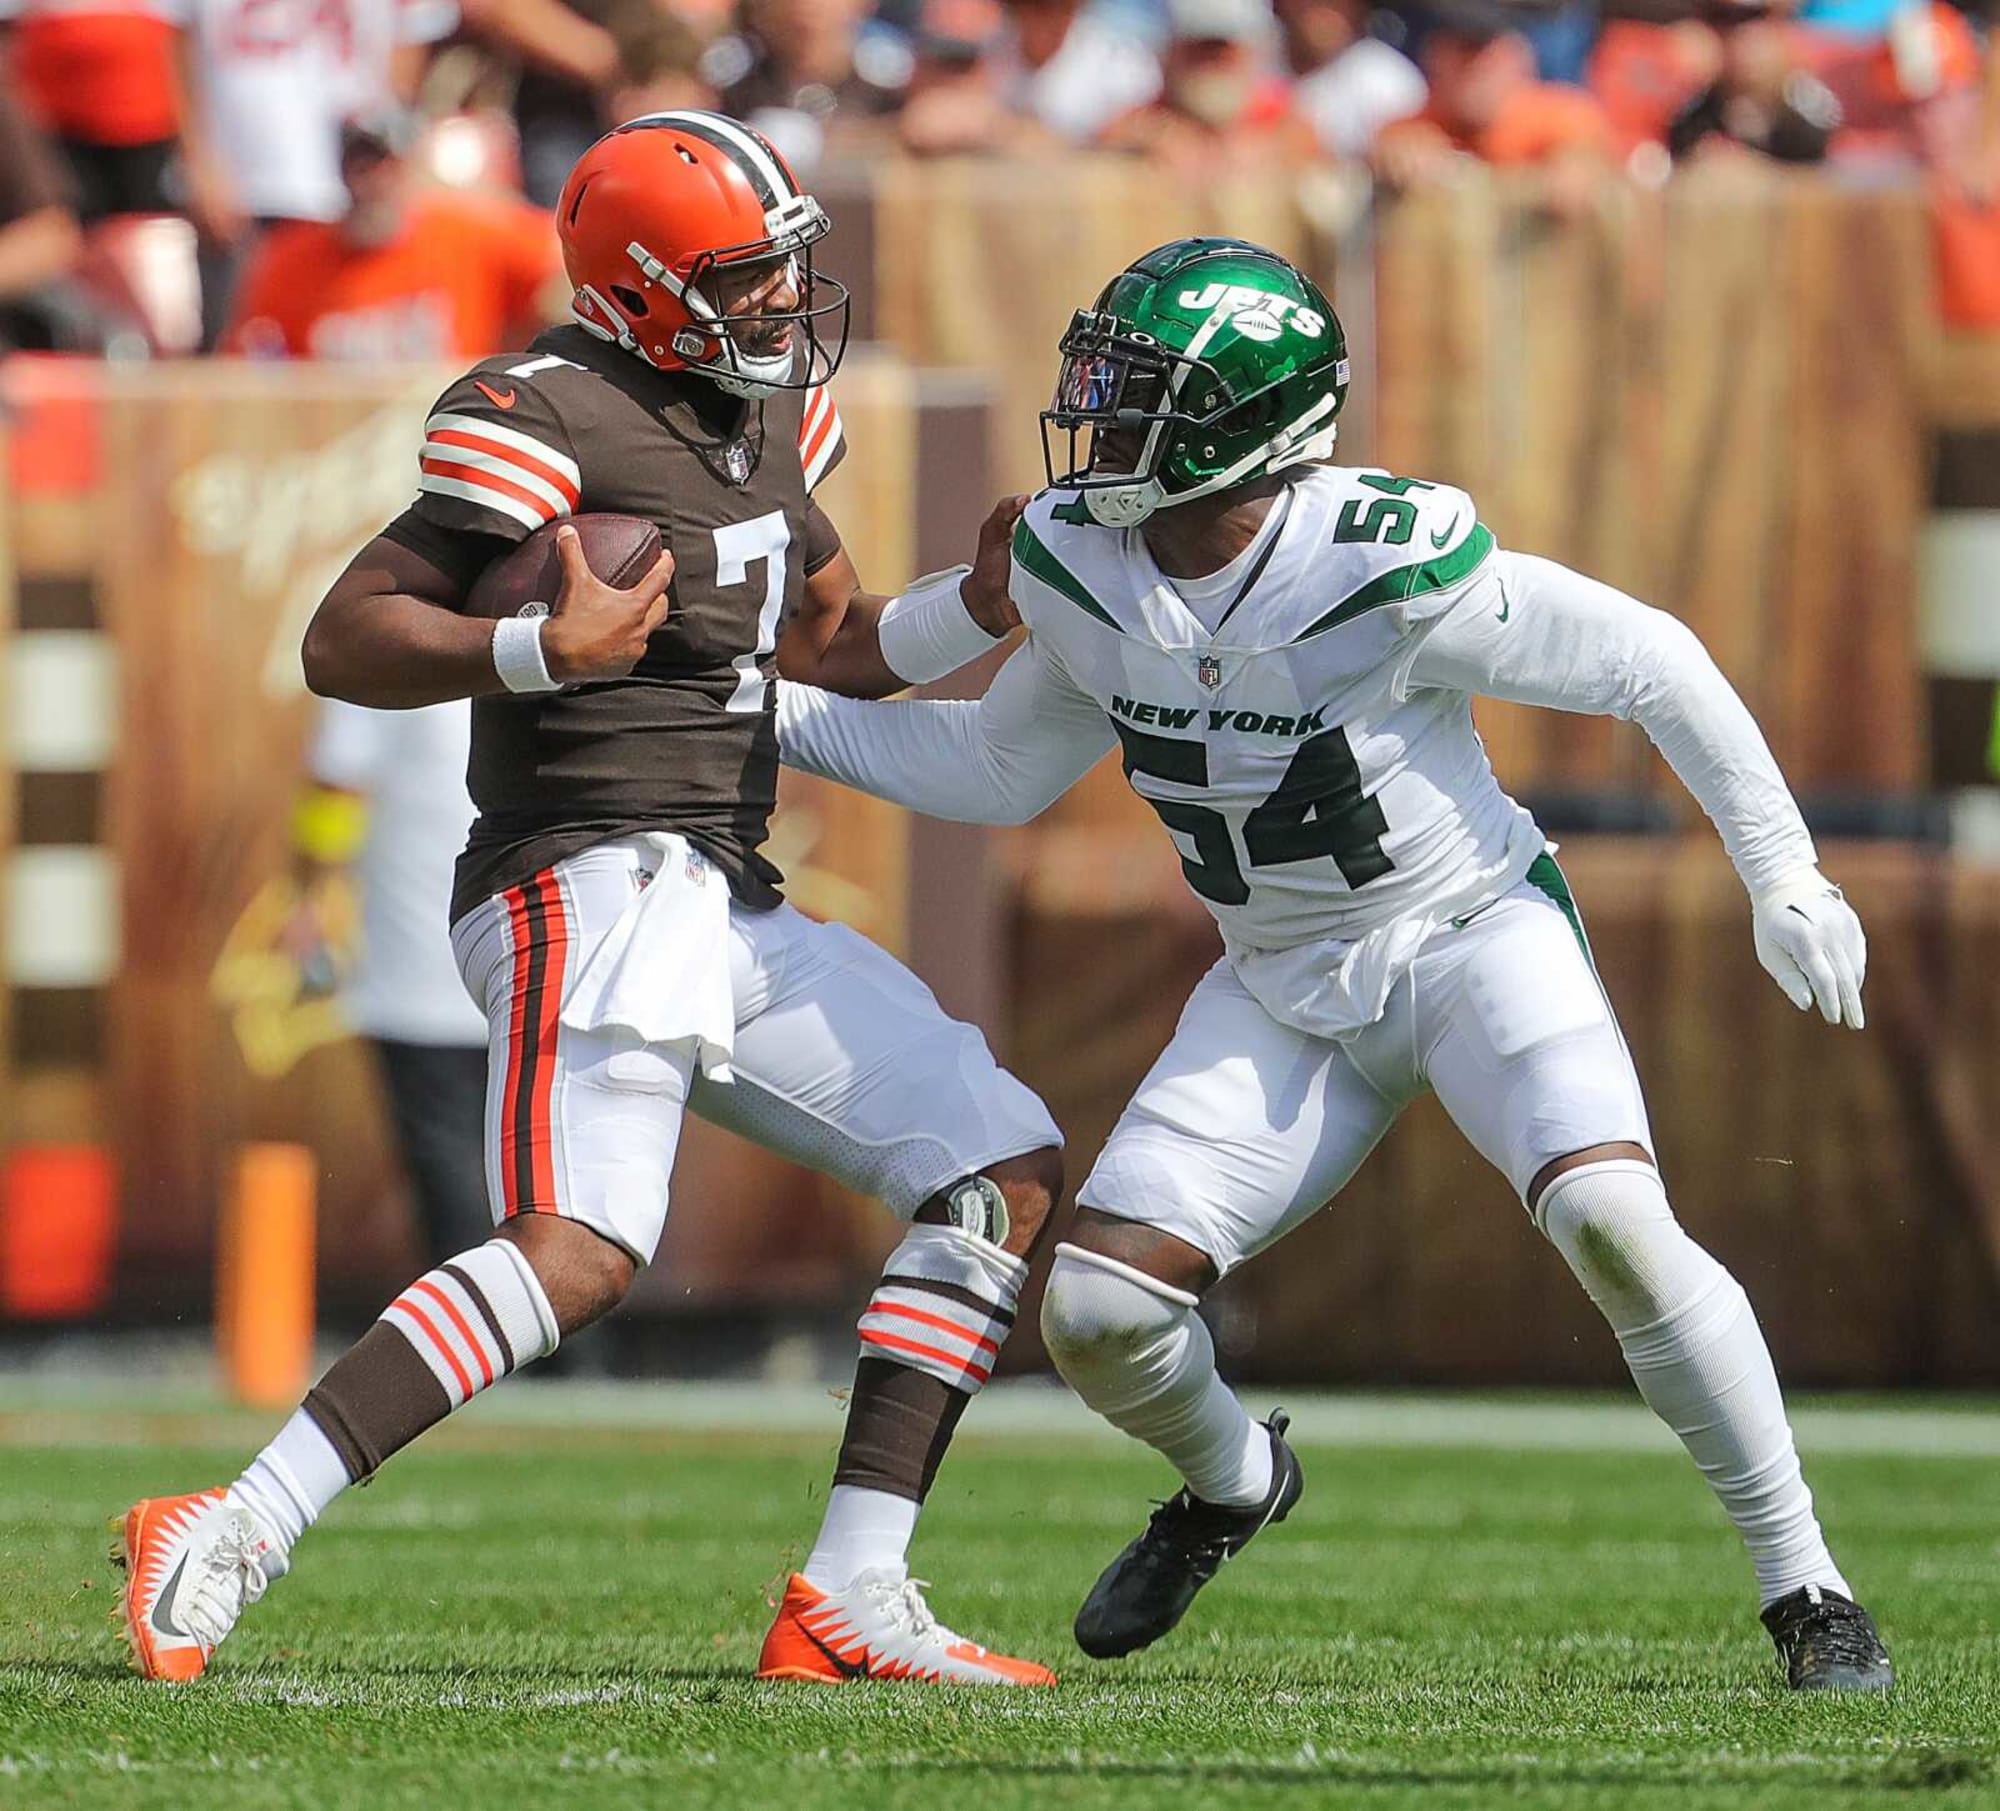 3 reasons to pump the brakes on Cleveland Browns hype